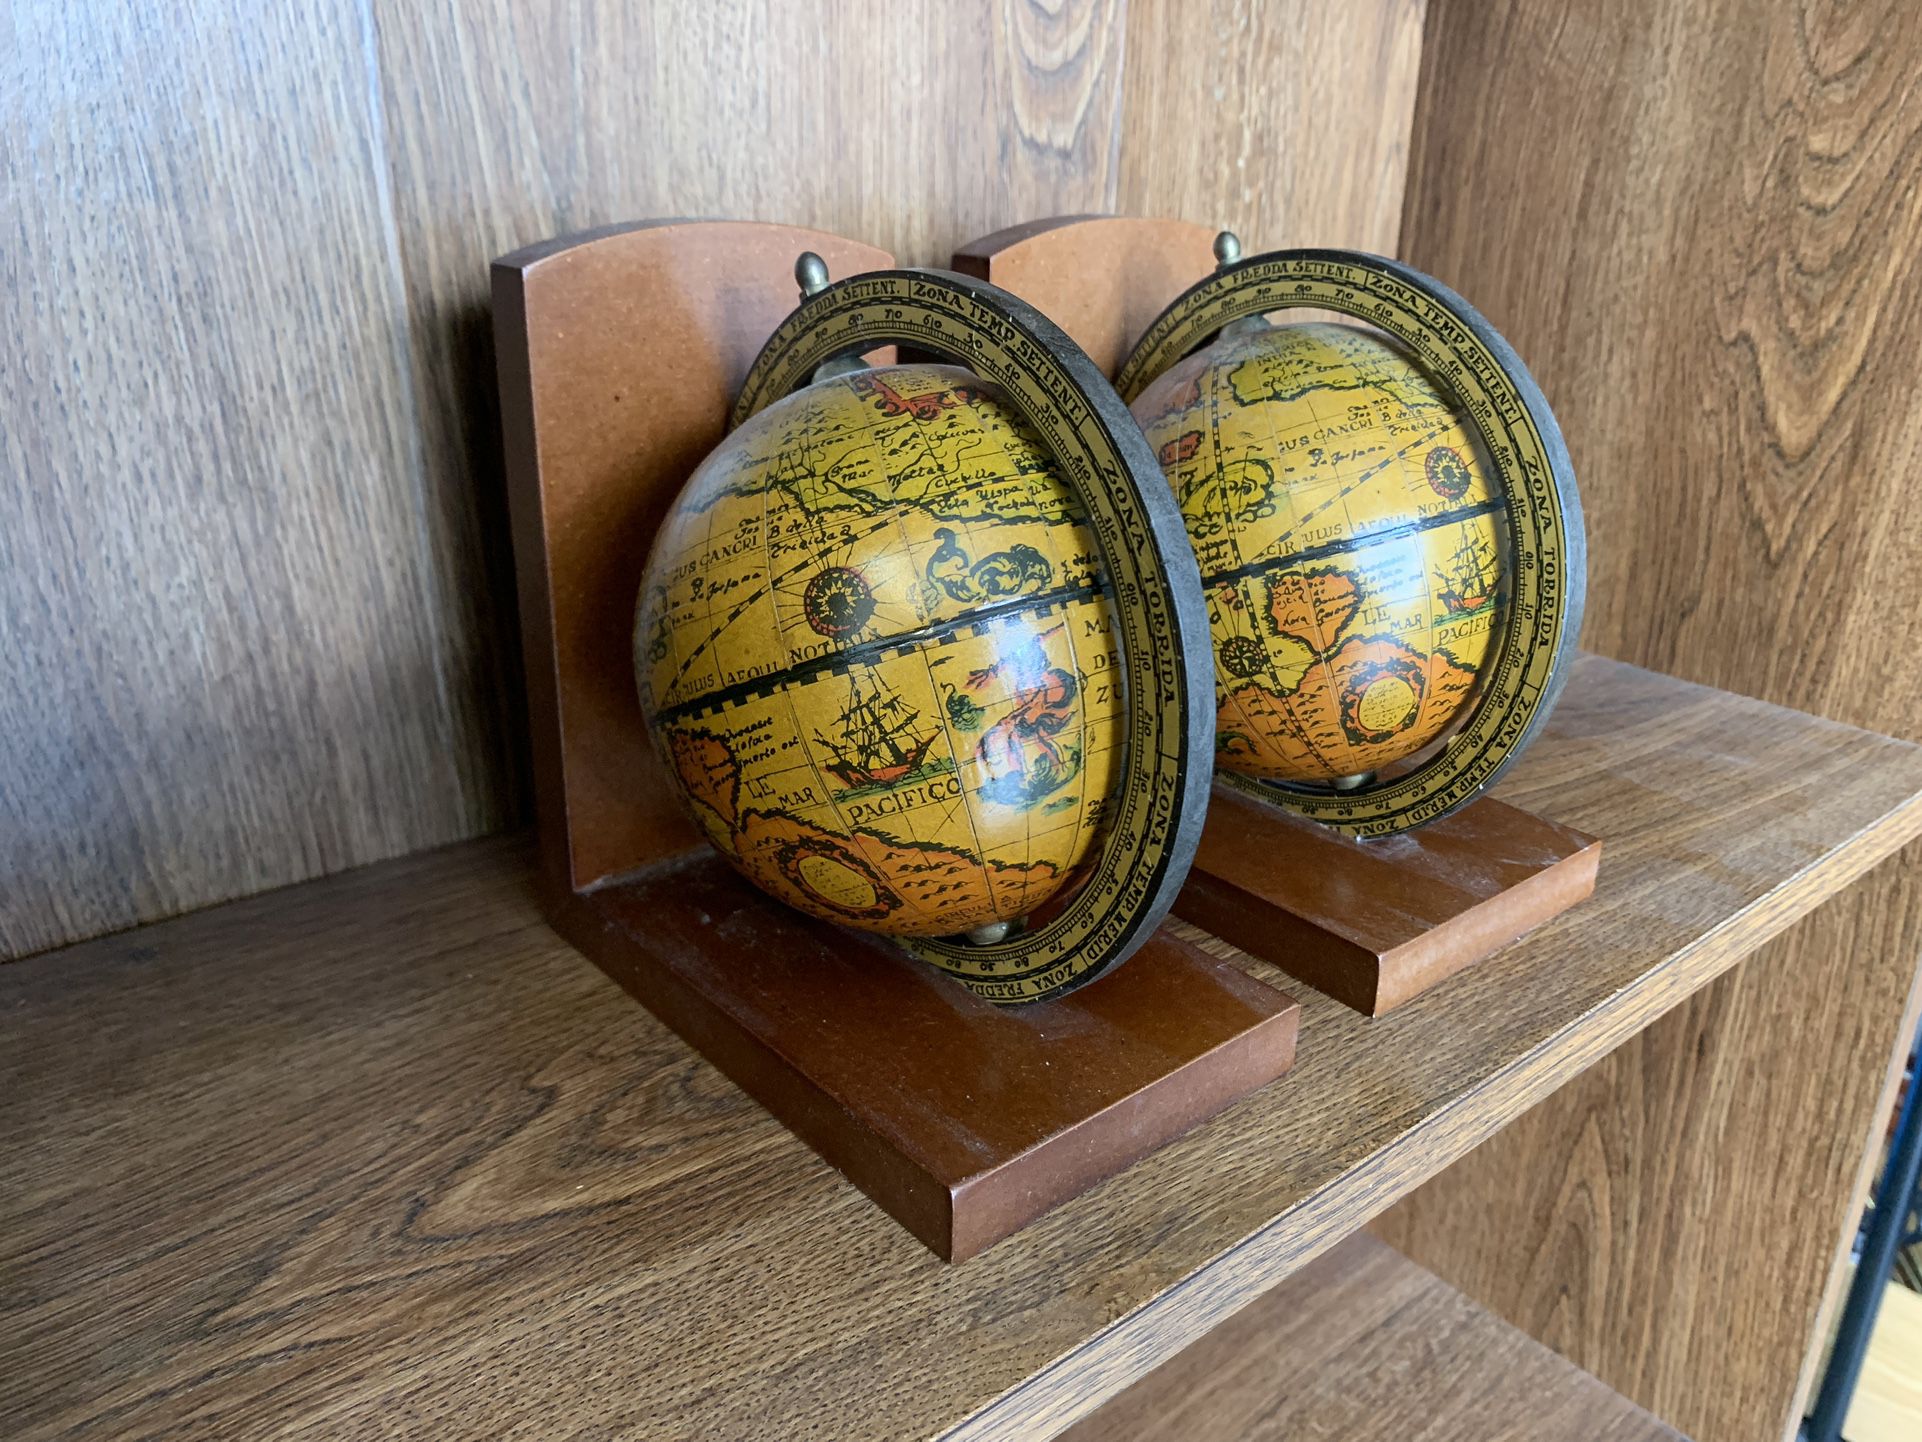 Pair Vintage Zona Torrida - Rotating Globe Old World Map Wood Bookends Very Good Condition 